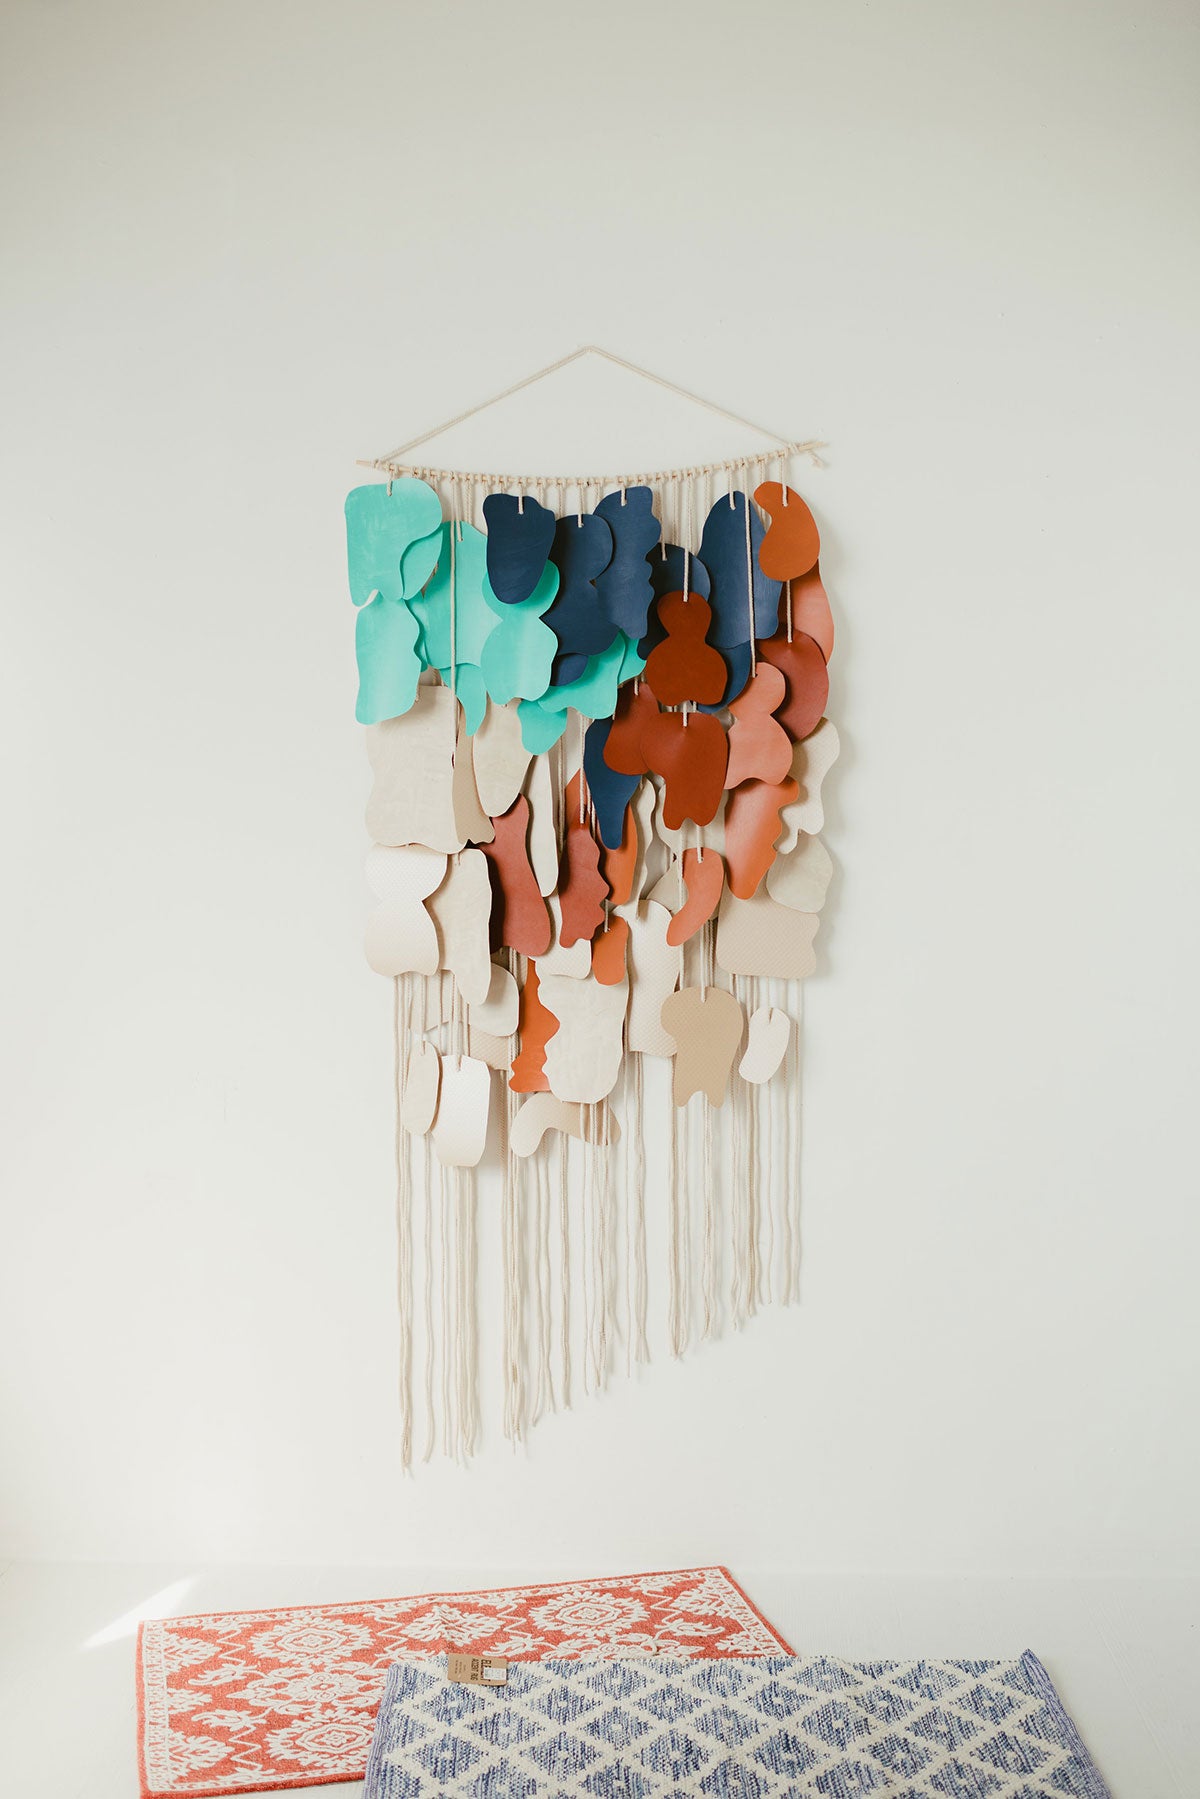 Trust Us: You Can Definitely Make Your Own Awe-Inspiring Wall Hanging